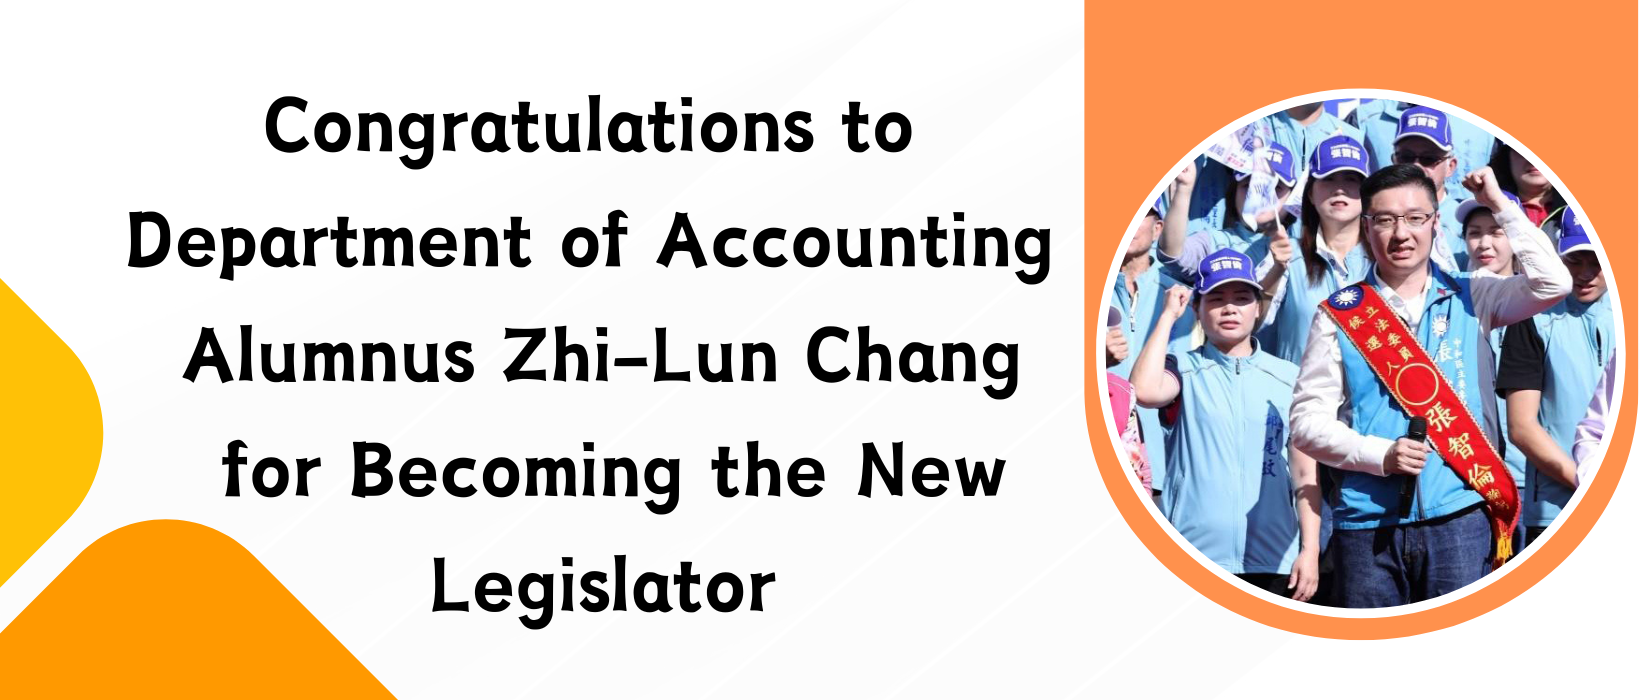 Featured image for “Congratulations to Department of Accounting Alumnus Zhi-Lun Chang for Becoming the New Legislator”